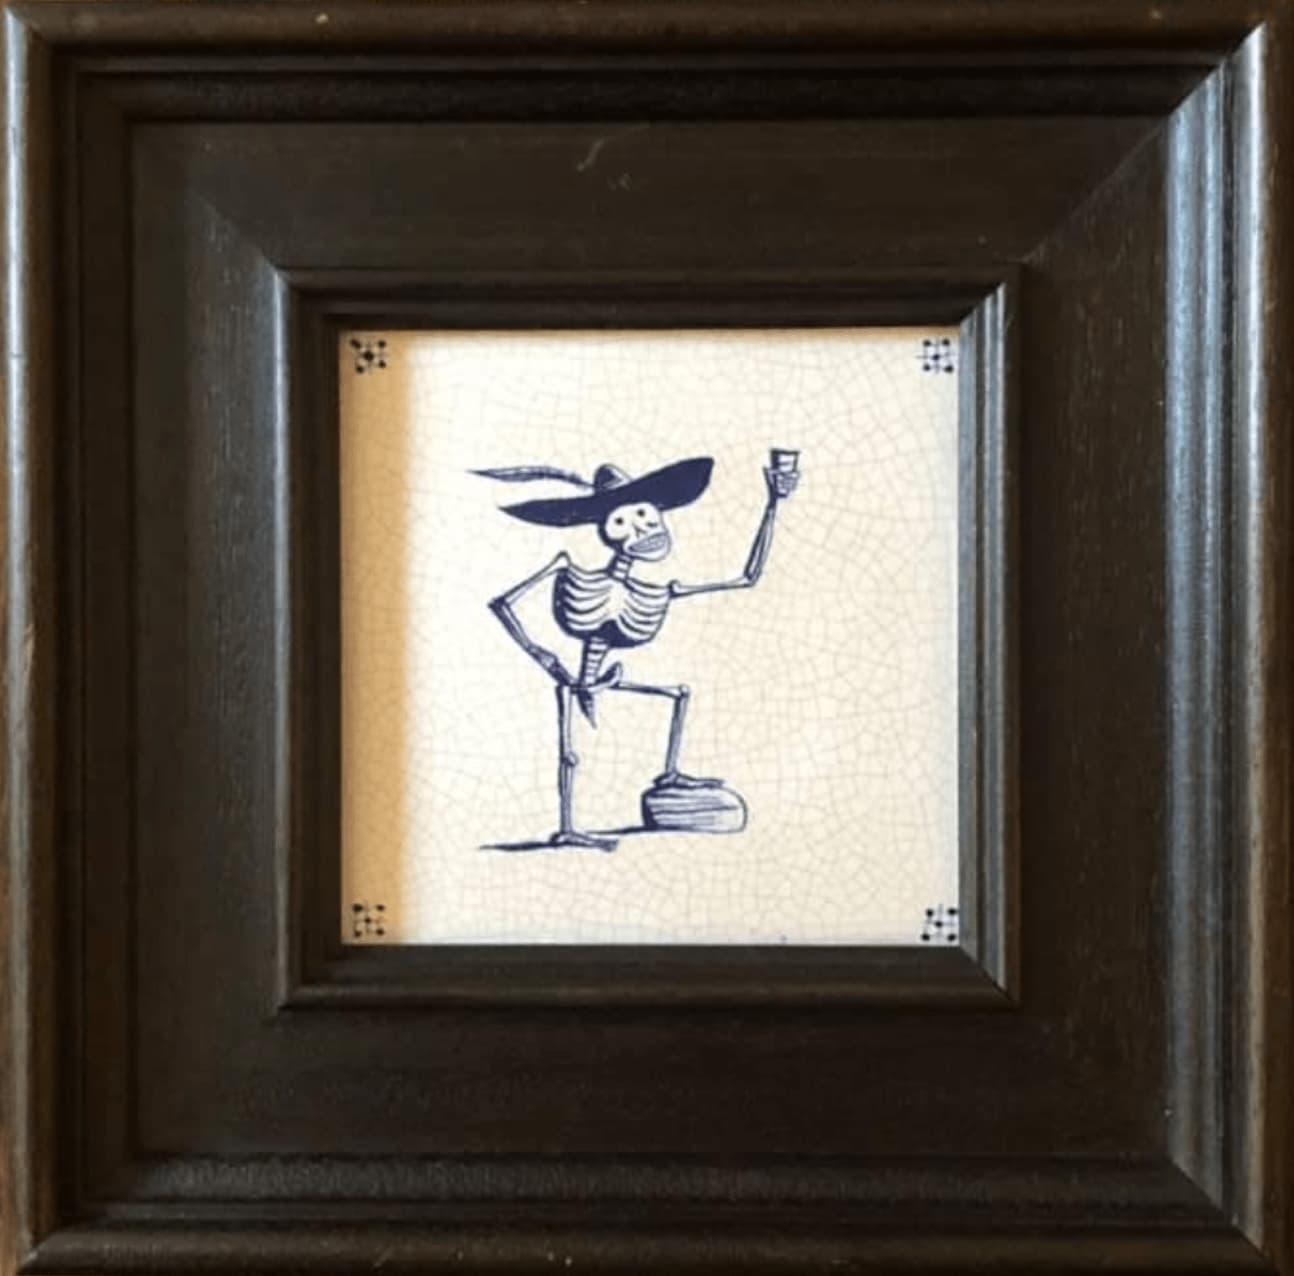 Paul Bommer Enjoy Yourself (It's Later Than You Think) Hand-painted Ceramic Delft Tile